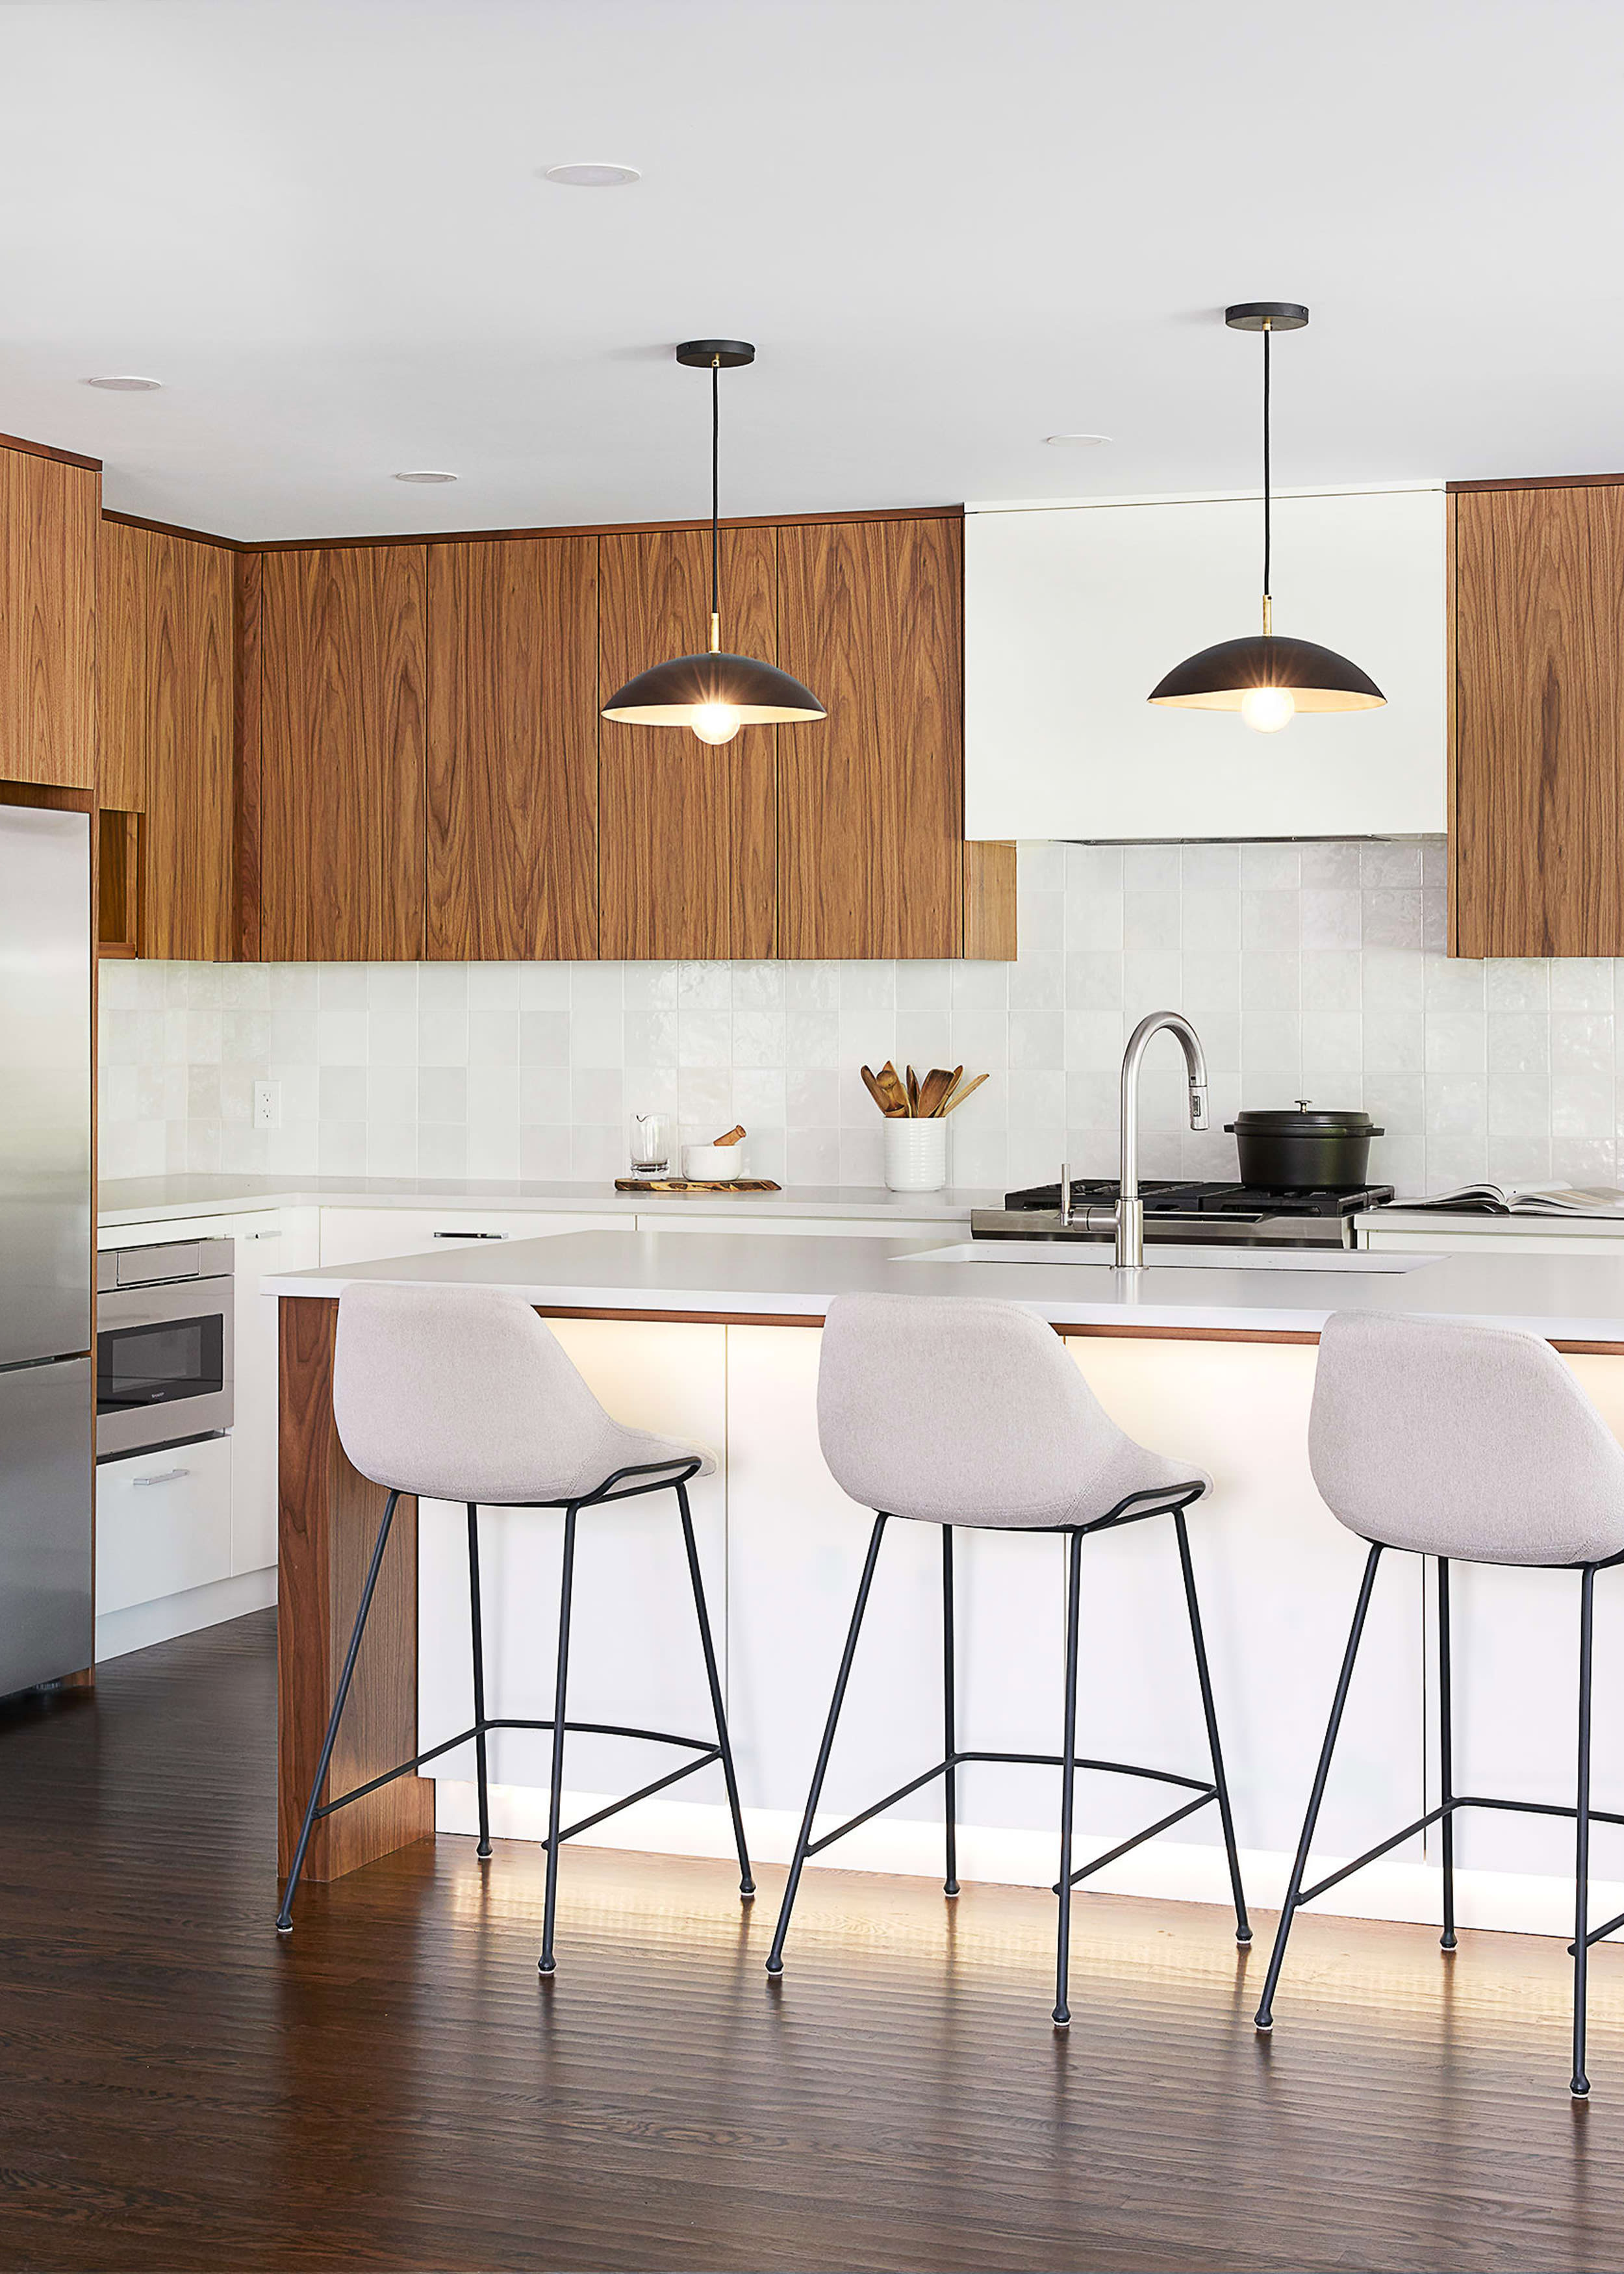 Modern kitchen with walnut uppers, white lower cabinets, and plush cream stools at the island